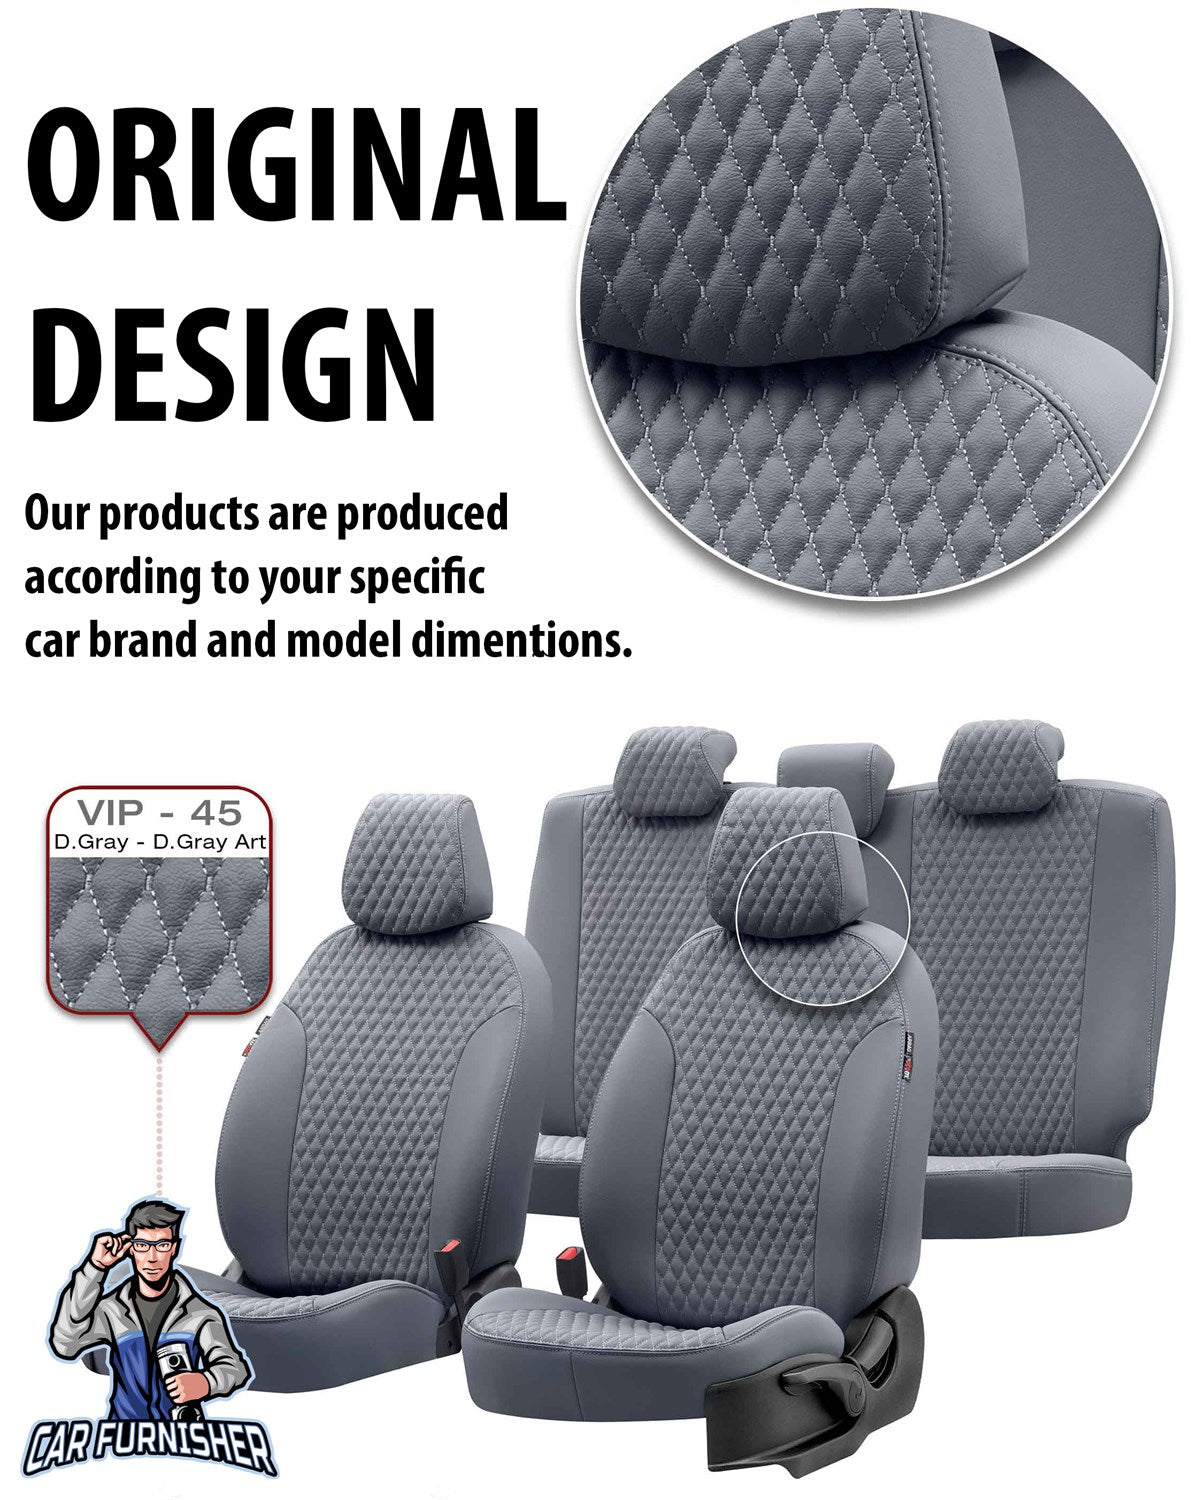 Peugeot Bipper Seat Covers Amsterdam Leather Design Dark Gray Leather